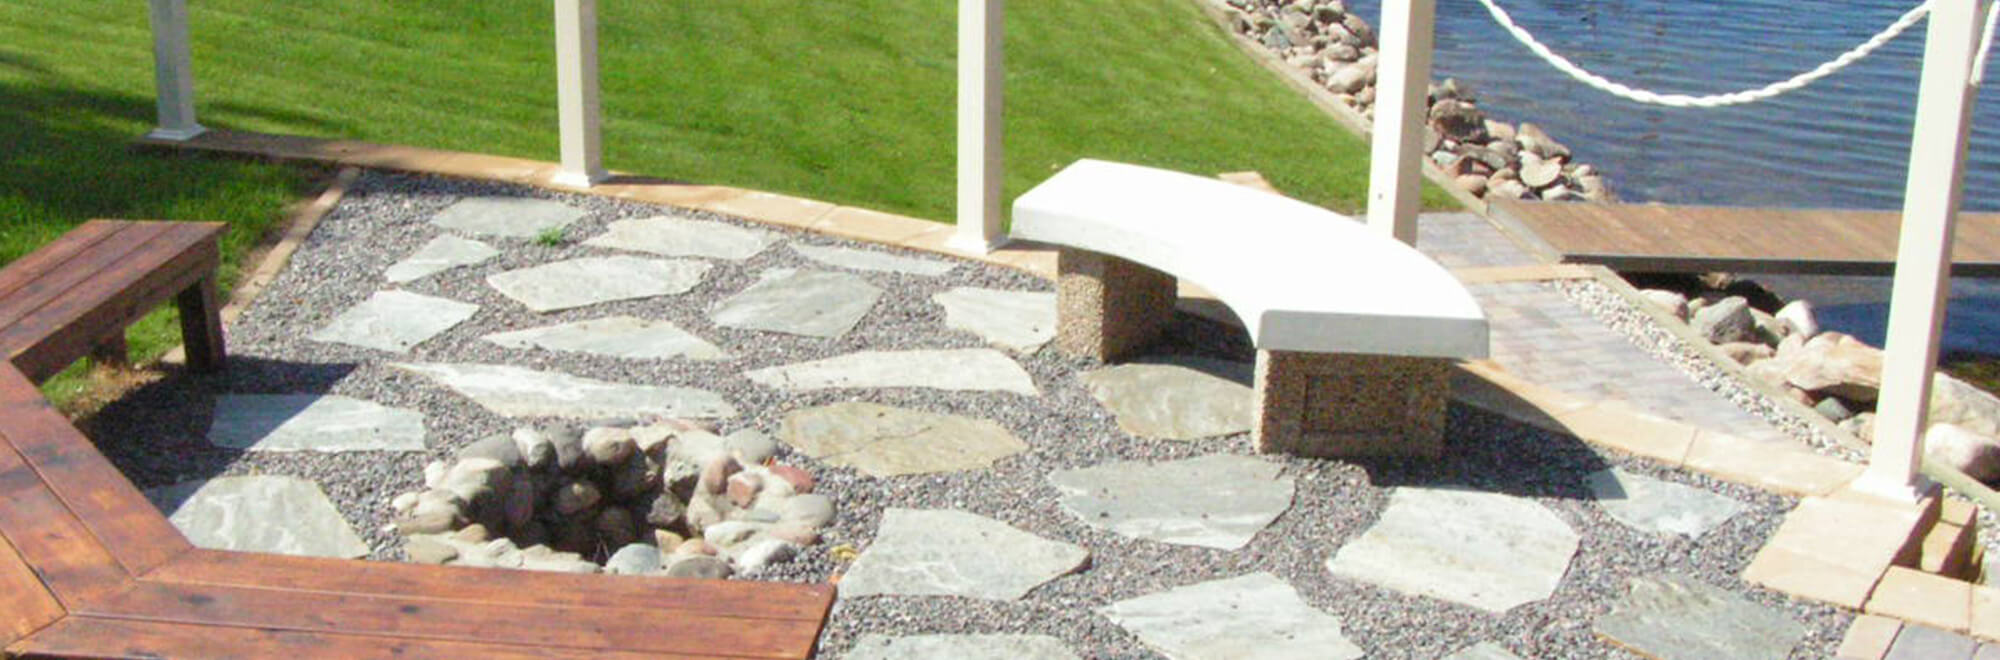 Stone patio areat with curved seating benches around an in-ground fire pit